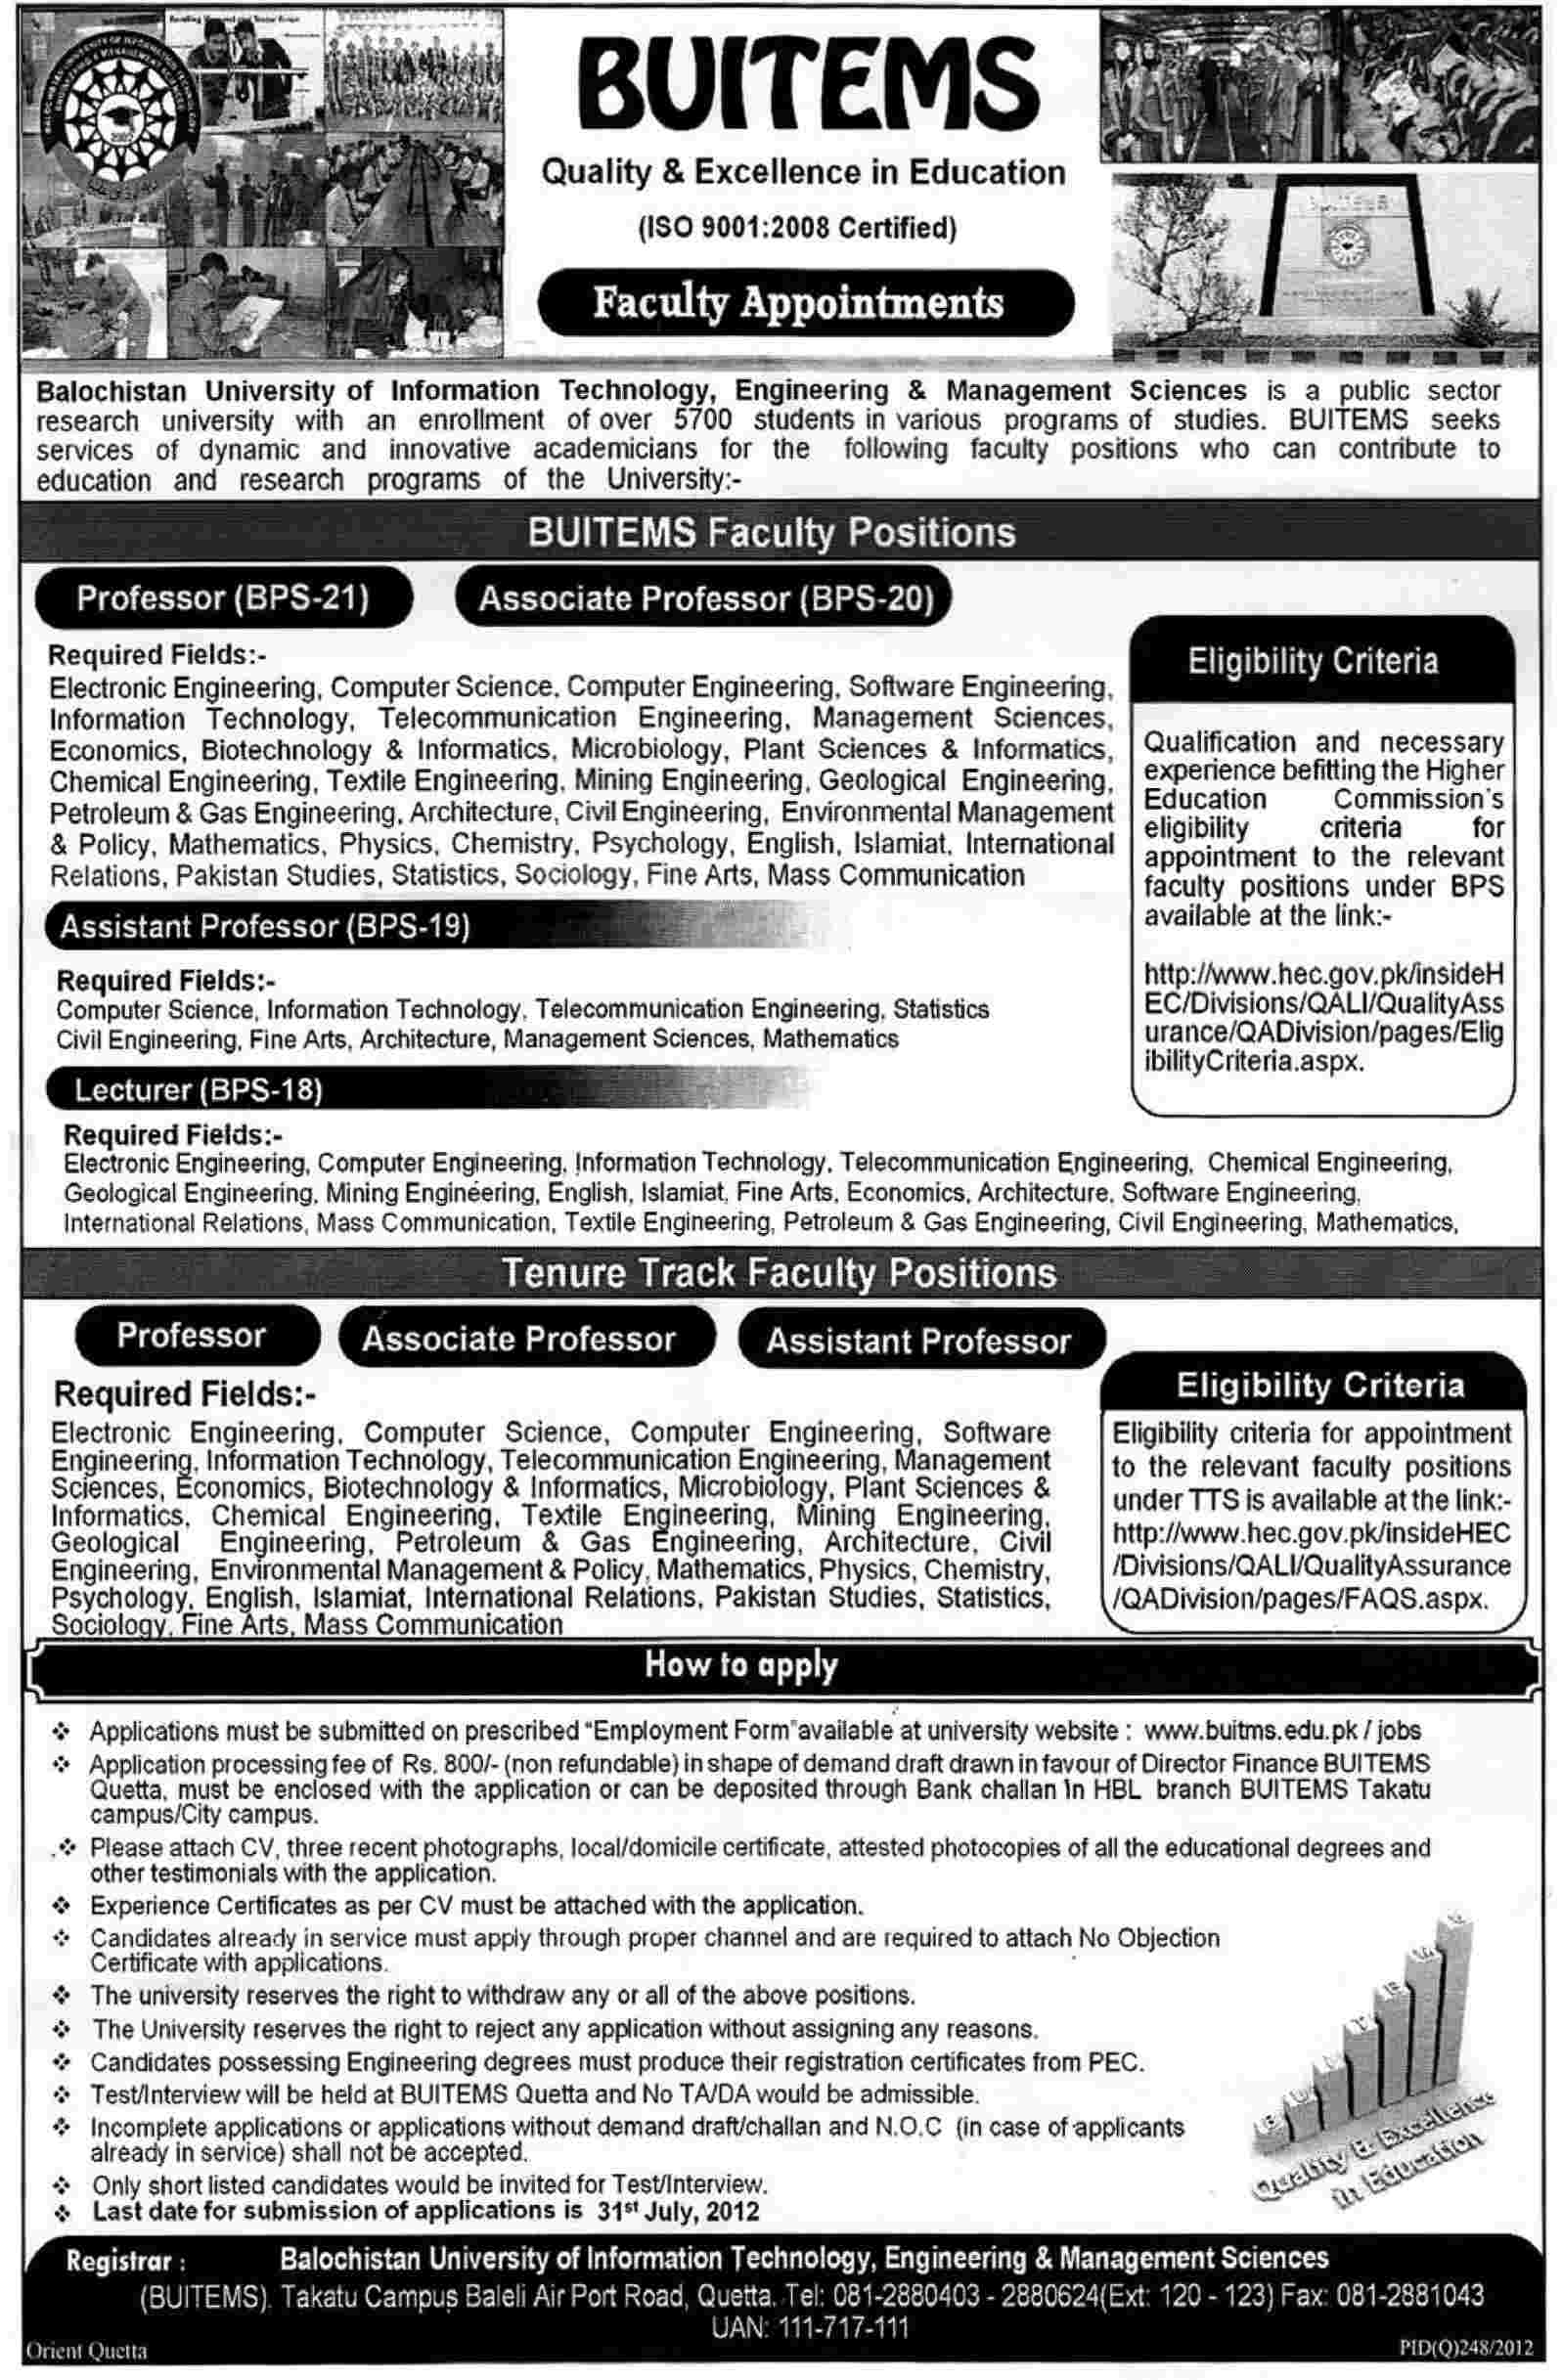 BUITEMS Balochistan University of Information Technology, Engineering & Management Sciences Requires Teaching Faculty (Govt. job)